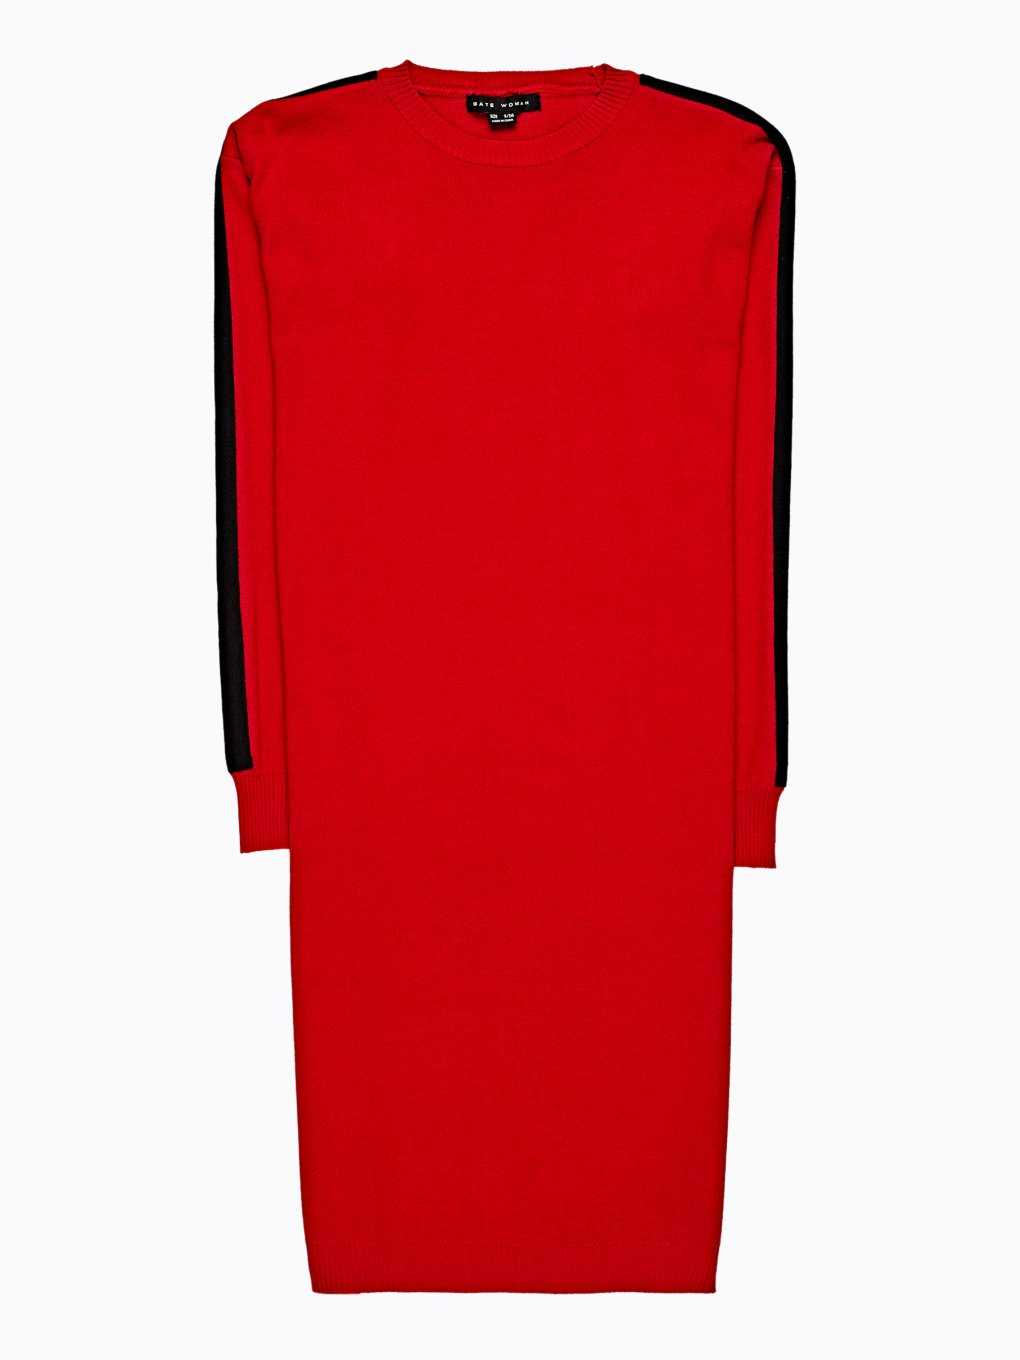 LONGLINE JUMPER WITH CONTRAST SLEEVE TAPE